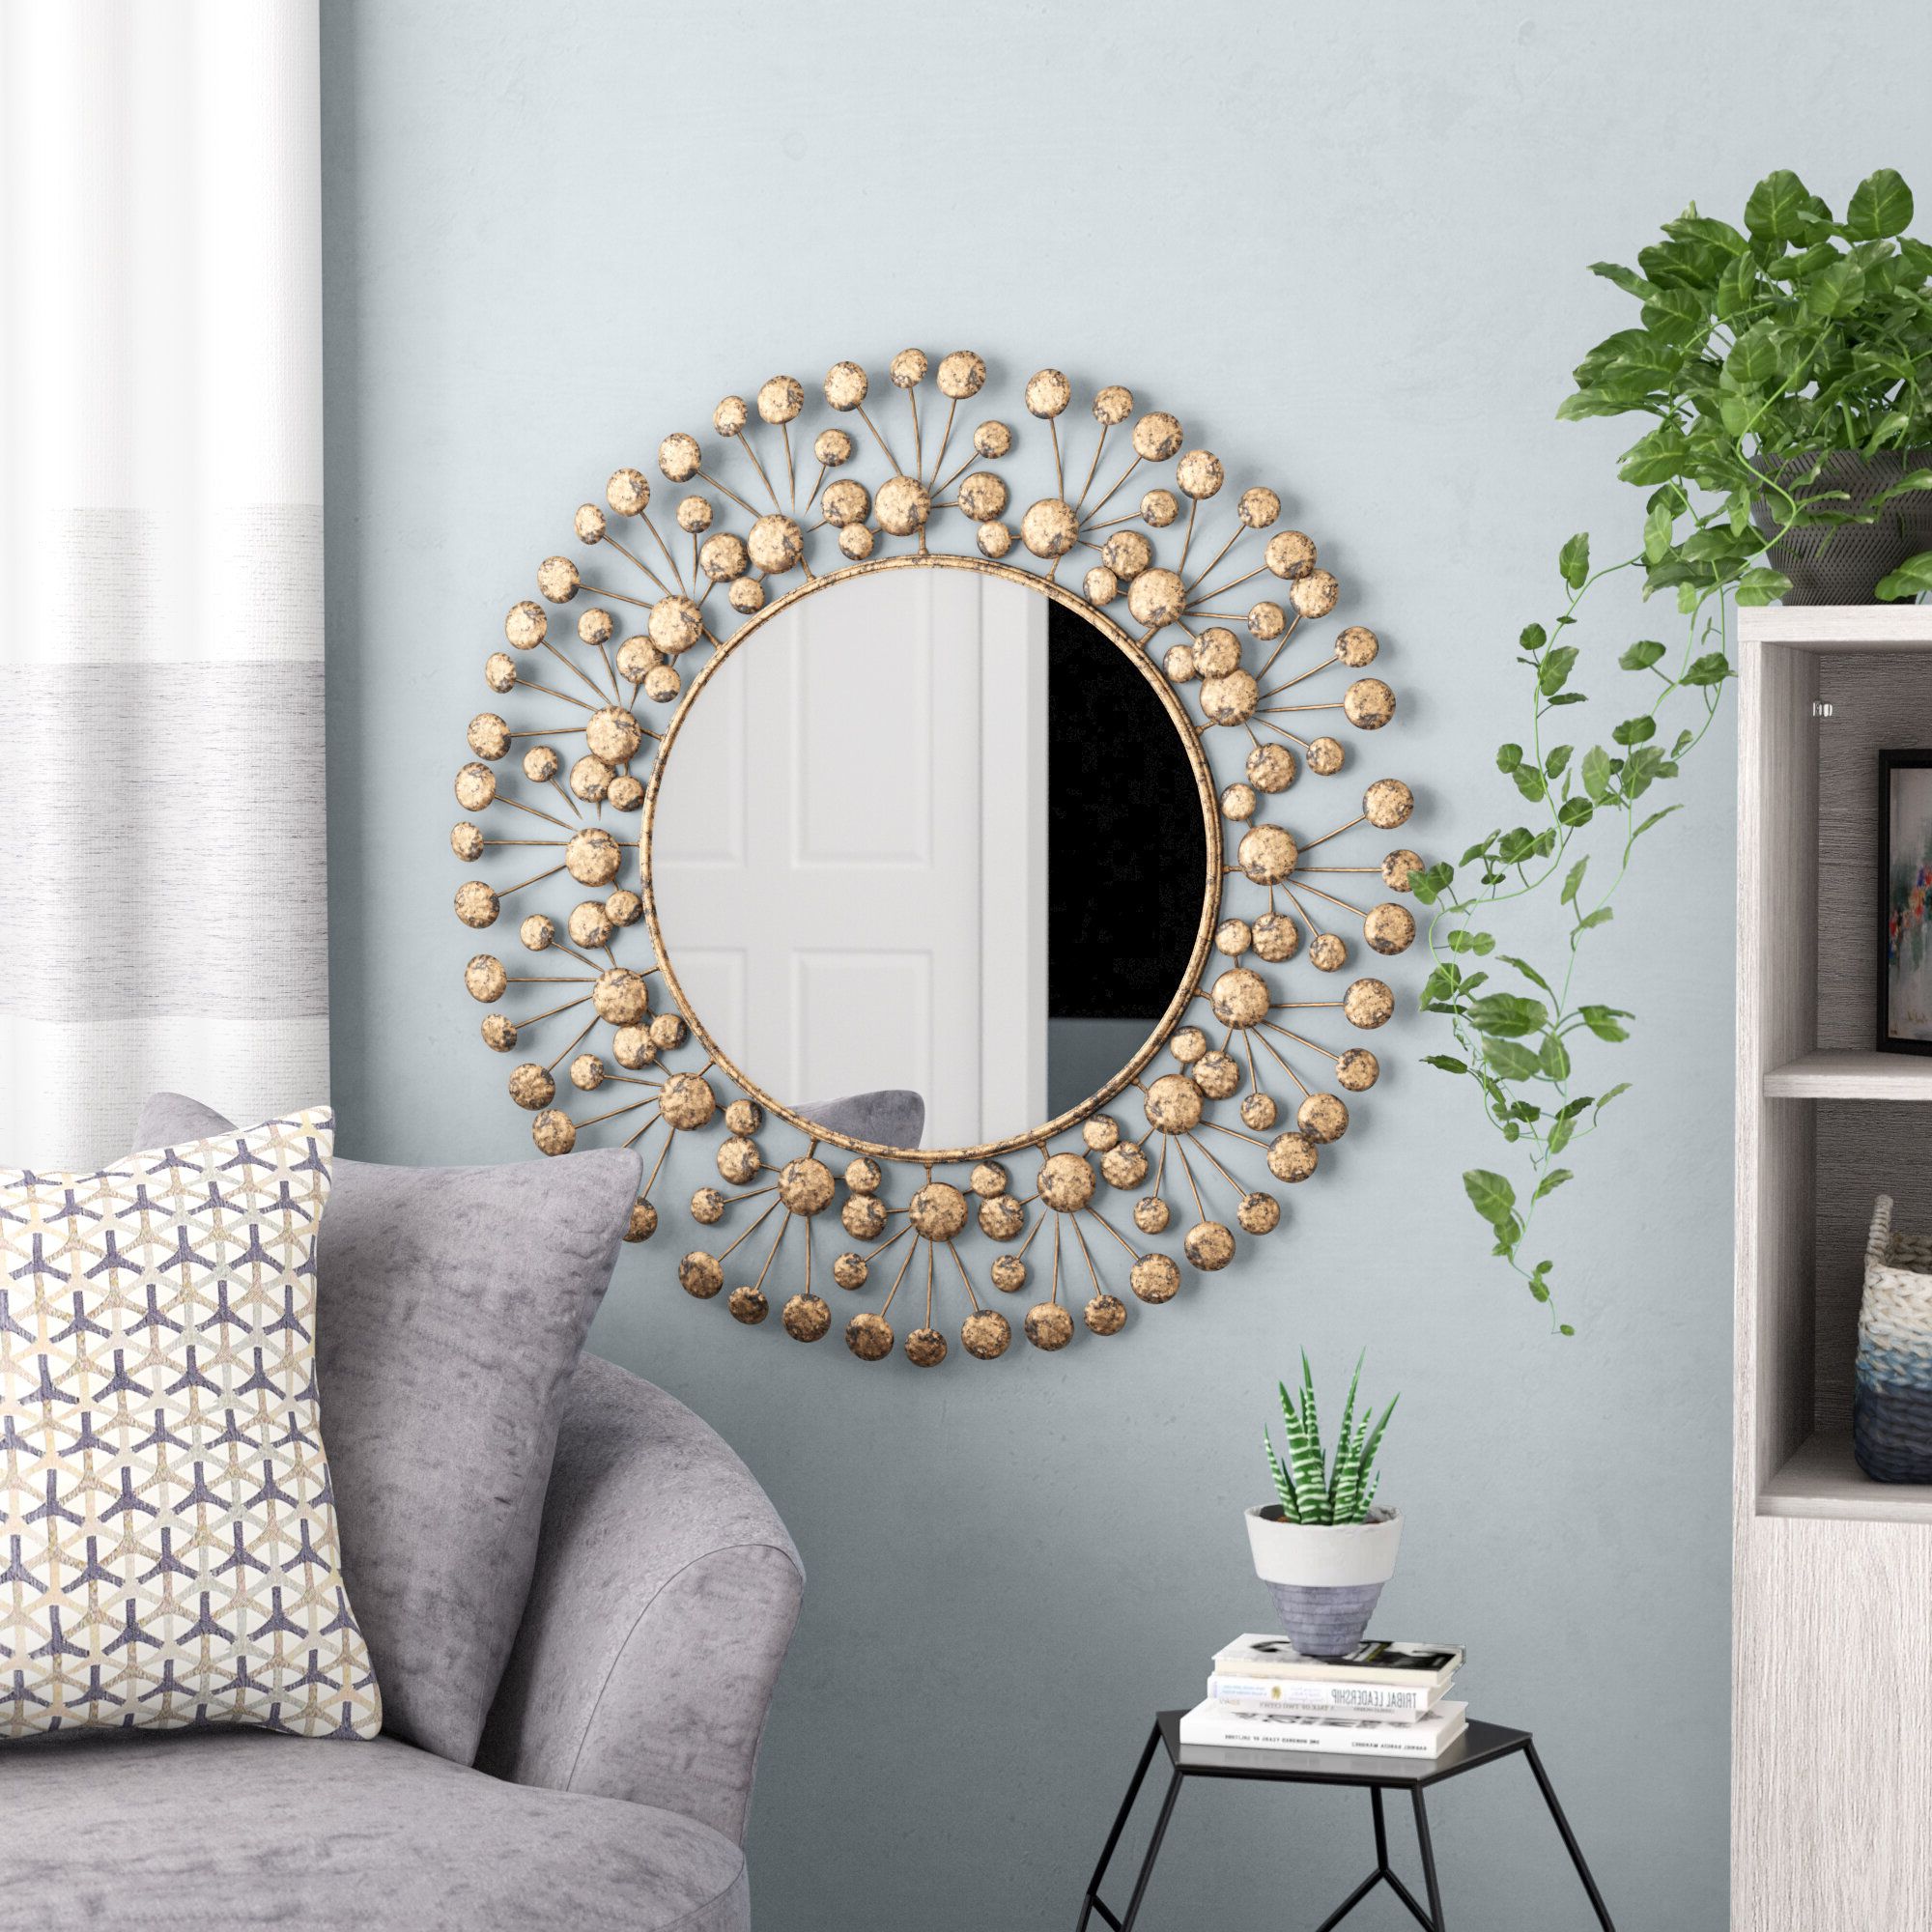 The 20 Best Collection of Decorative Living Room Wall Mirrors